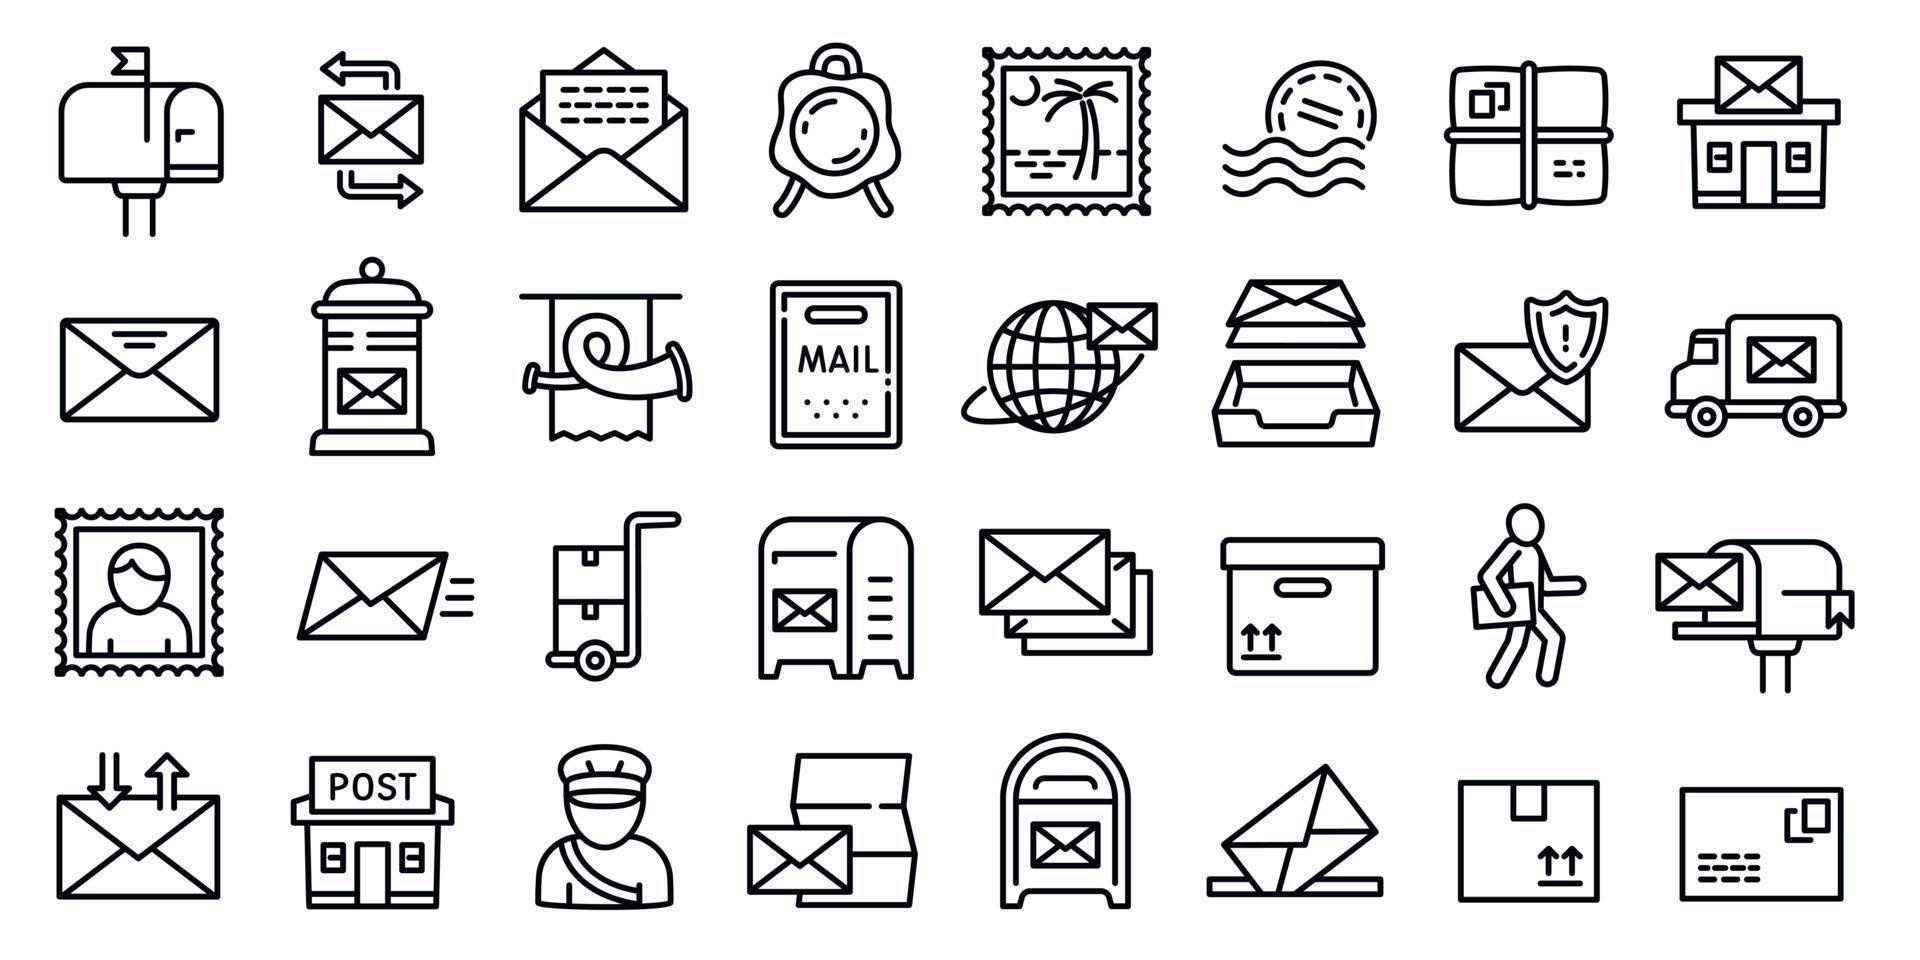 Postman icons set, outline style vector